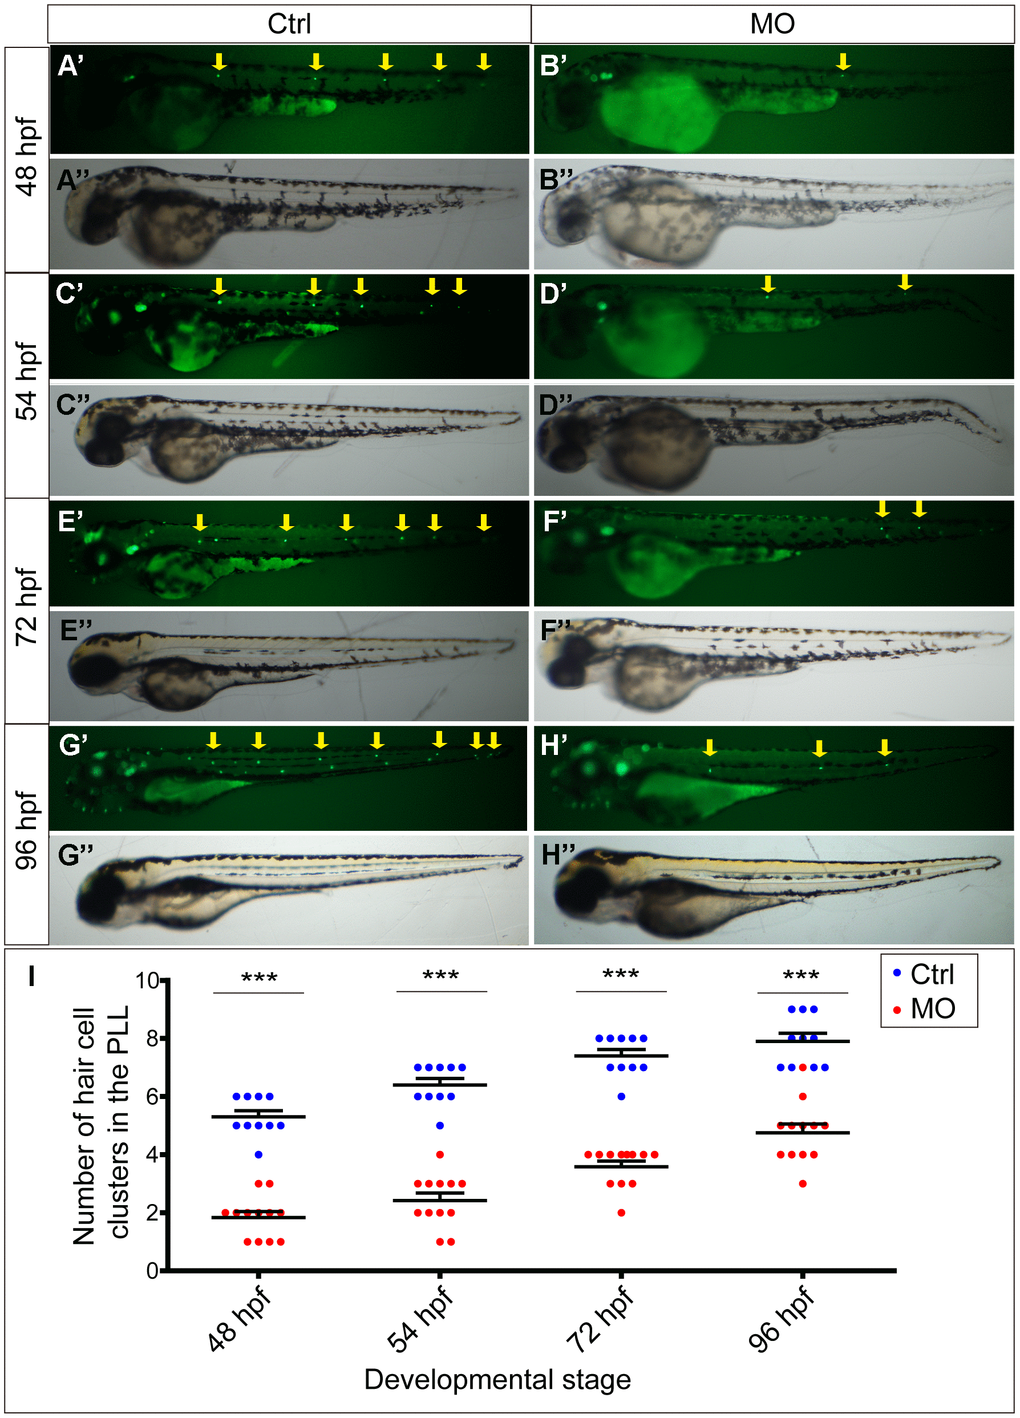 slc4a2b knockdown leads to decreased HC clusters in the posterior lateral line of zebrafish. (A–D) Zebrafish injected with slc4a2b-morpholino (MO) had normal morphology (B’’, D’’, F’’, H’’) but decreased HC clusters in the posterior lateral line (B’, D’, F’, H’) compared to the controls (Ctrl) (A’’, C’’, E’’, G’’ and A’, C’, E’, G’) at different developmental stages. The HC clusters in the posterior lateral line are indicated by yellow arrows. (I) Quantification of the number of HC clusters in the posterior lateral line in slc4a2b-morphants and controls at different developmental stages. ***P 